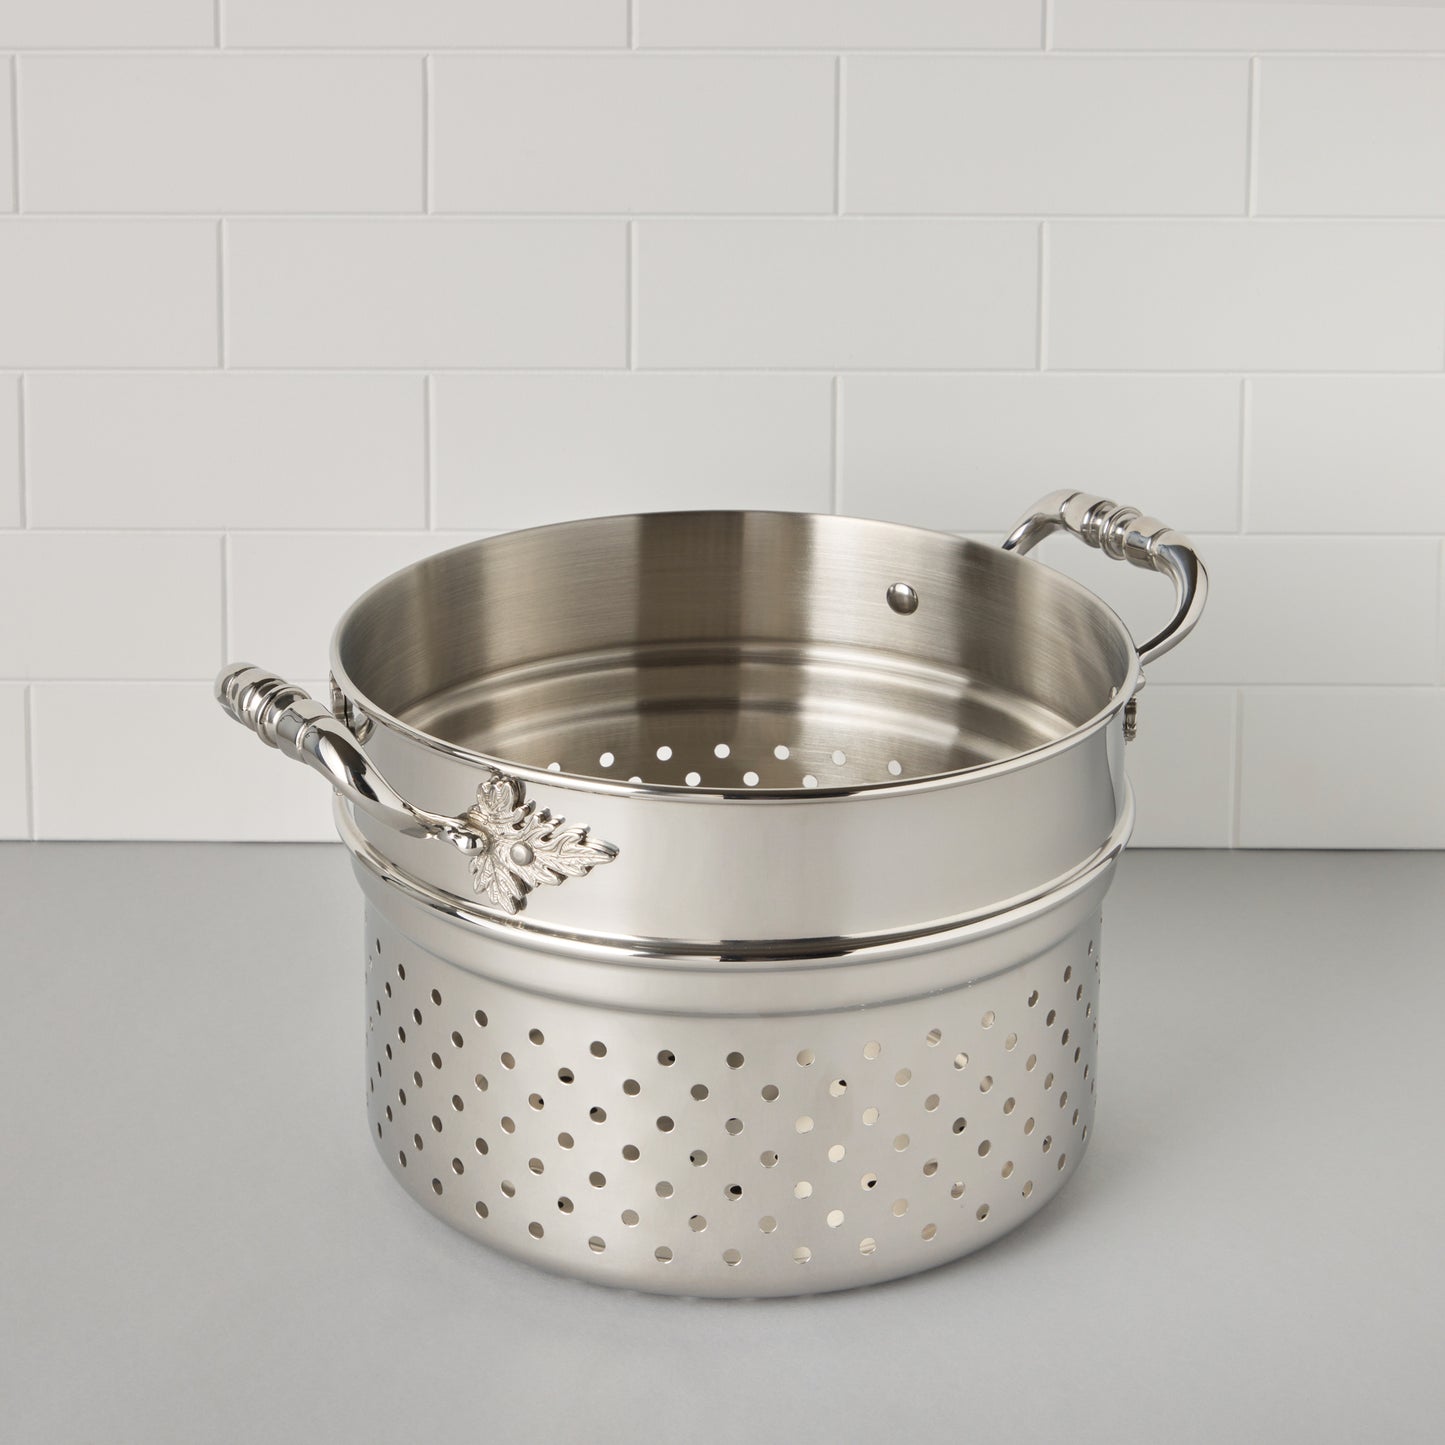 Ruffoni stainless steel insert for cooking pasta with the Opus Prima 6qt Stockpot